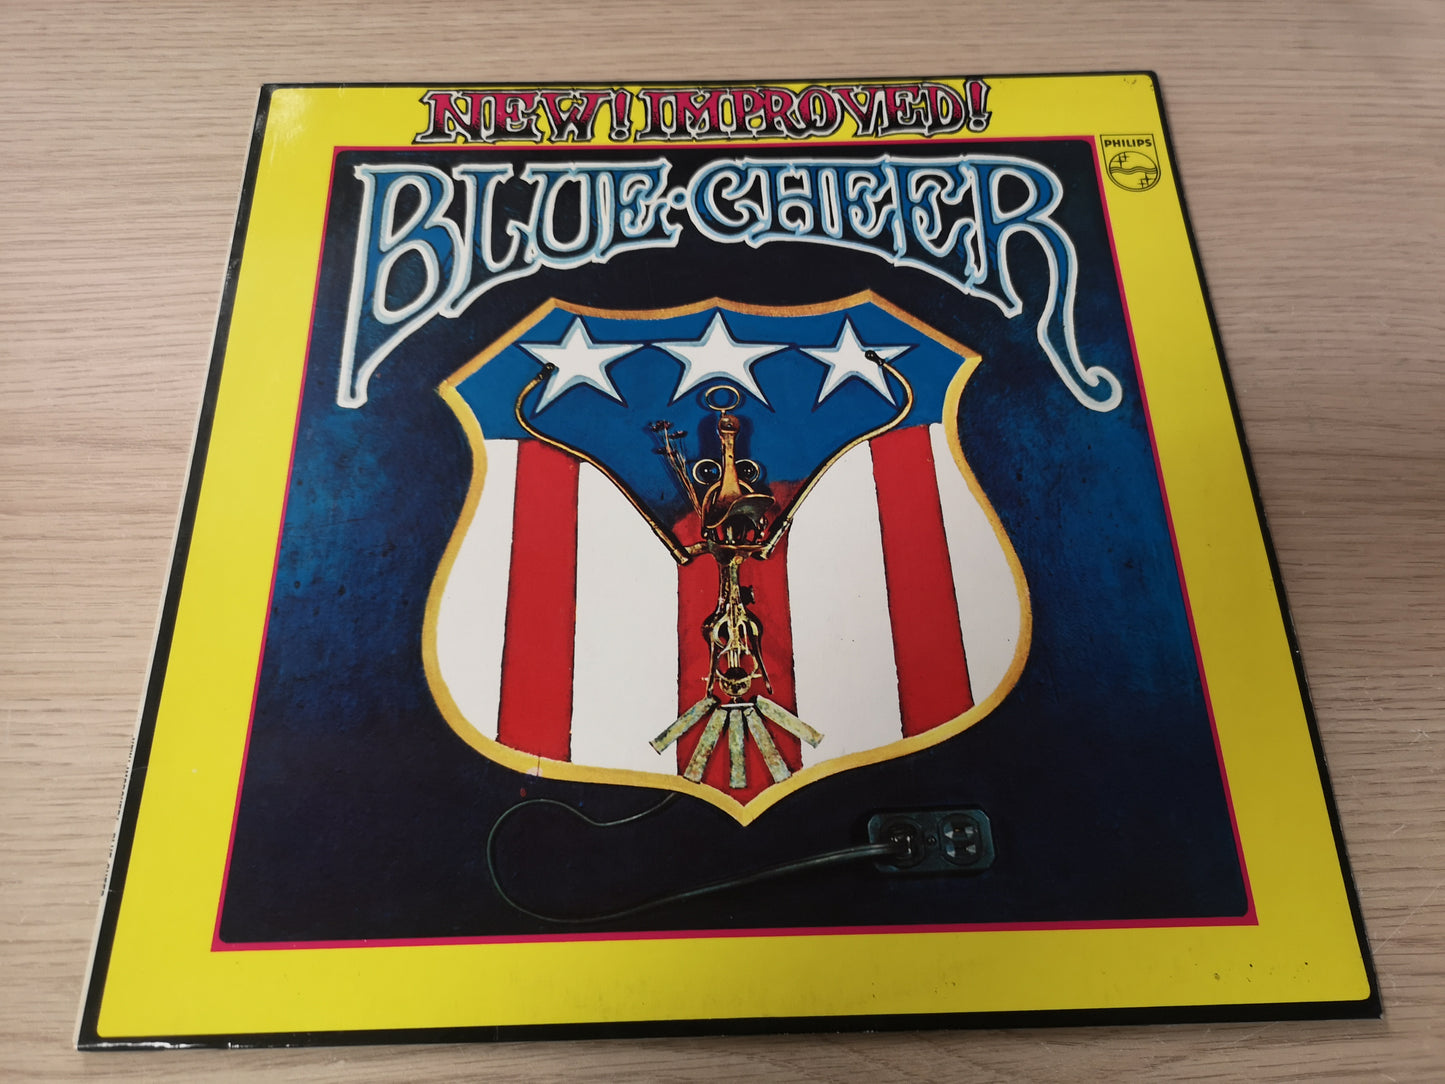 Blue Cheer "New! Improved!" Orig Germany 1969 M-/EX (w/ Randy Holden)